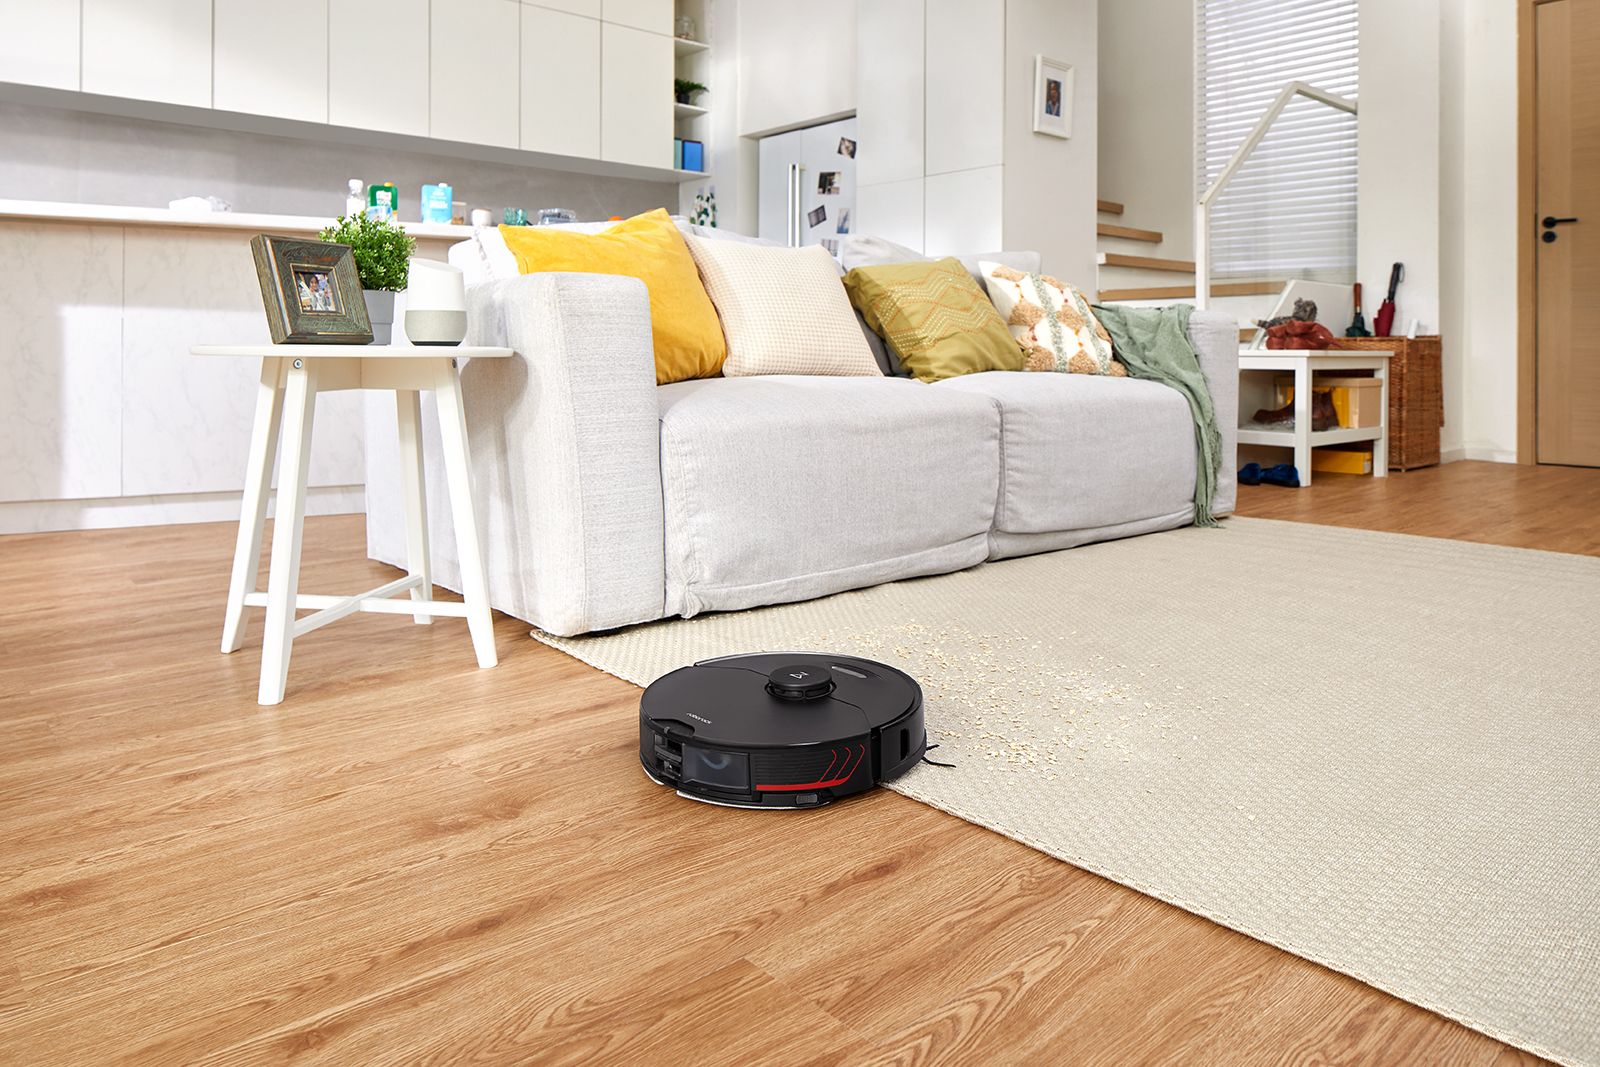 The Roborock S7 MaxV vacuum cleans carpets and wooden floors